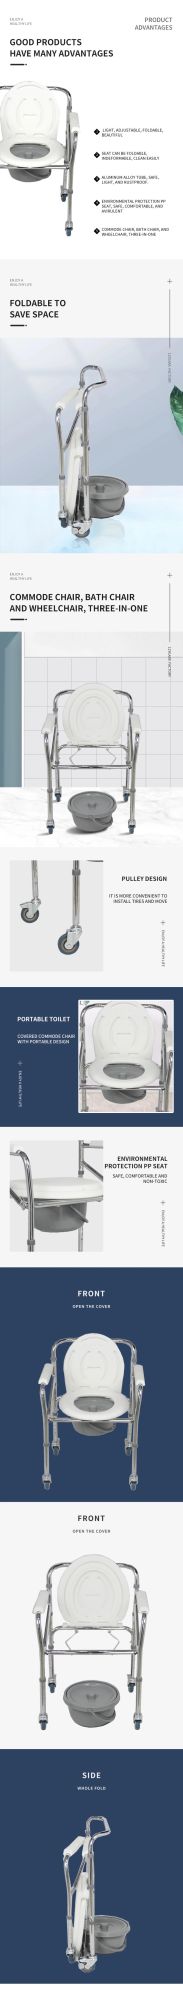 Powder Coating Surface Steel Shower Seat Over Toilet Chair Height Adjust Lightweight Steel Chair Commode with Wheels